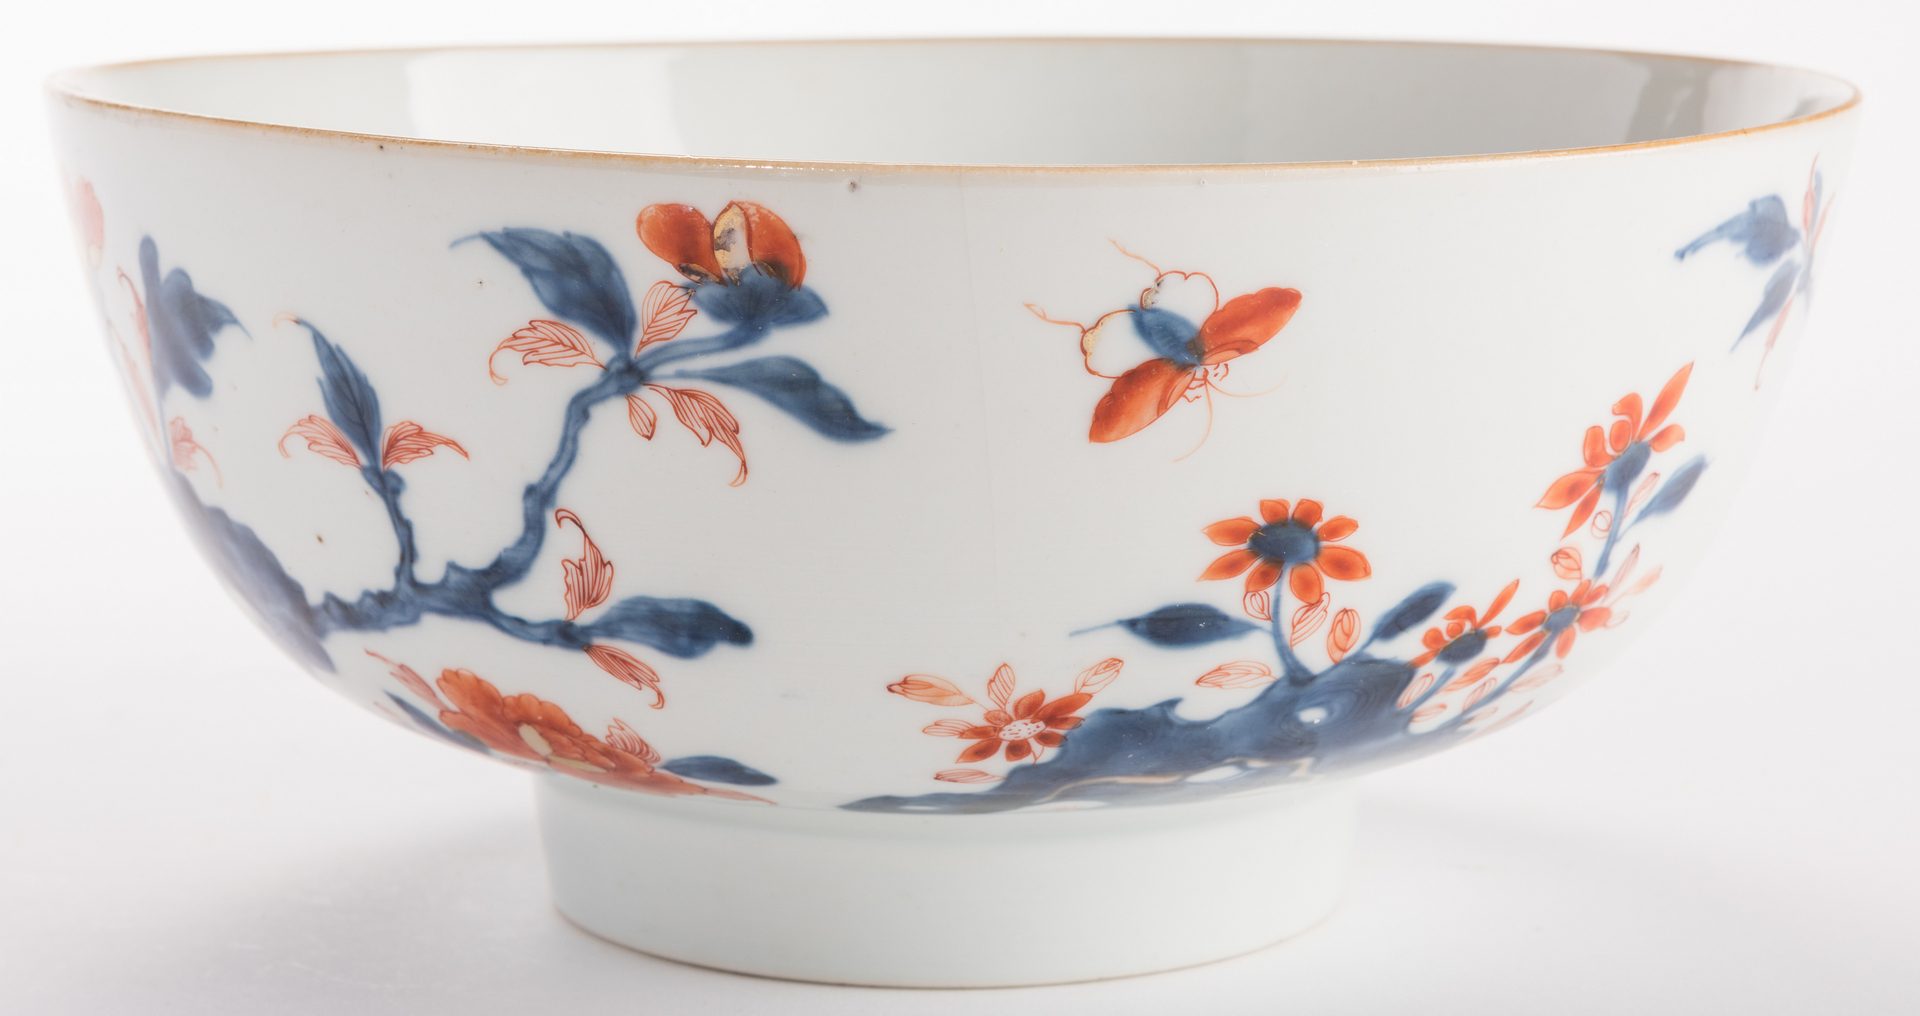 Lot 318: 2 large Chinese Imari Export Porcelain Footed Bowls, 18th c.